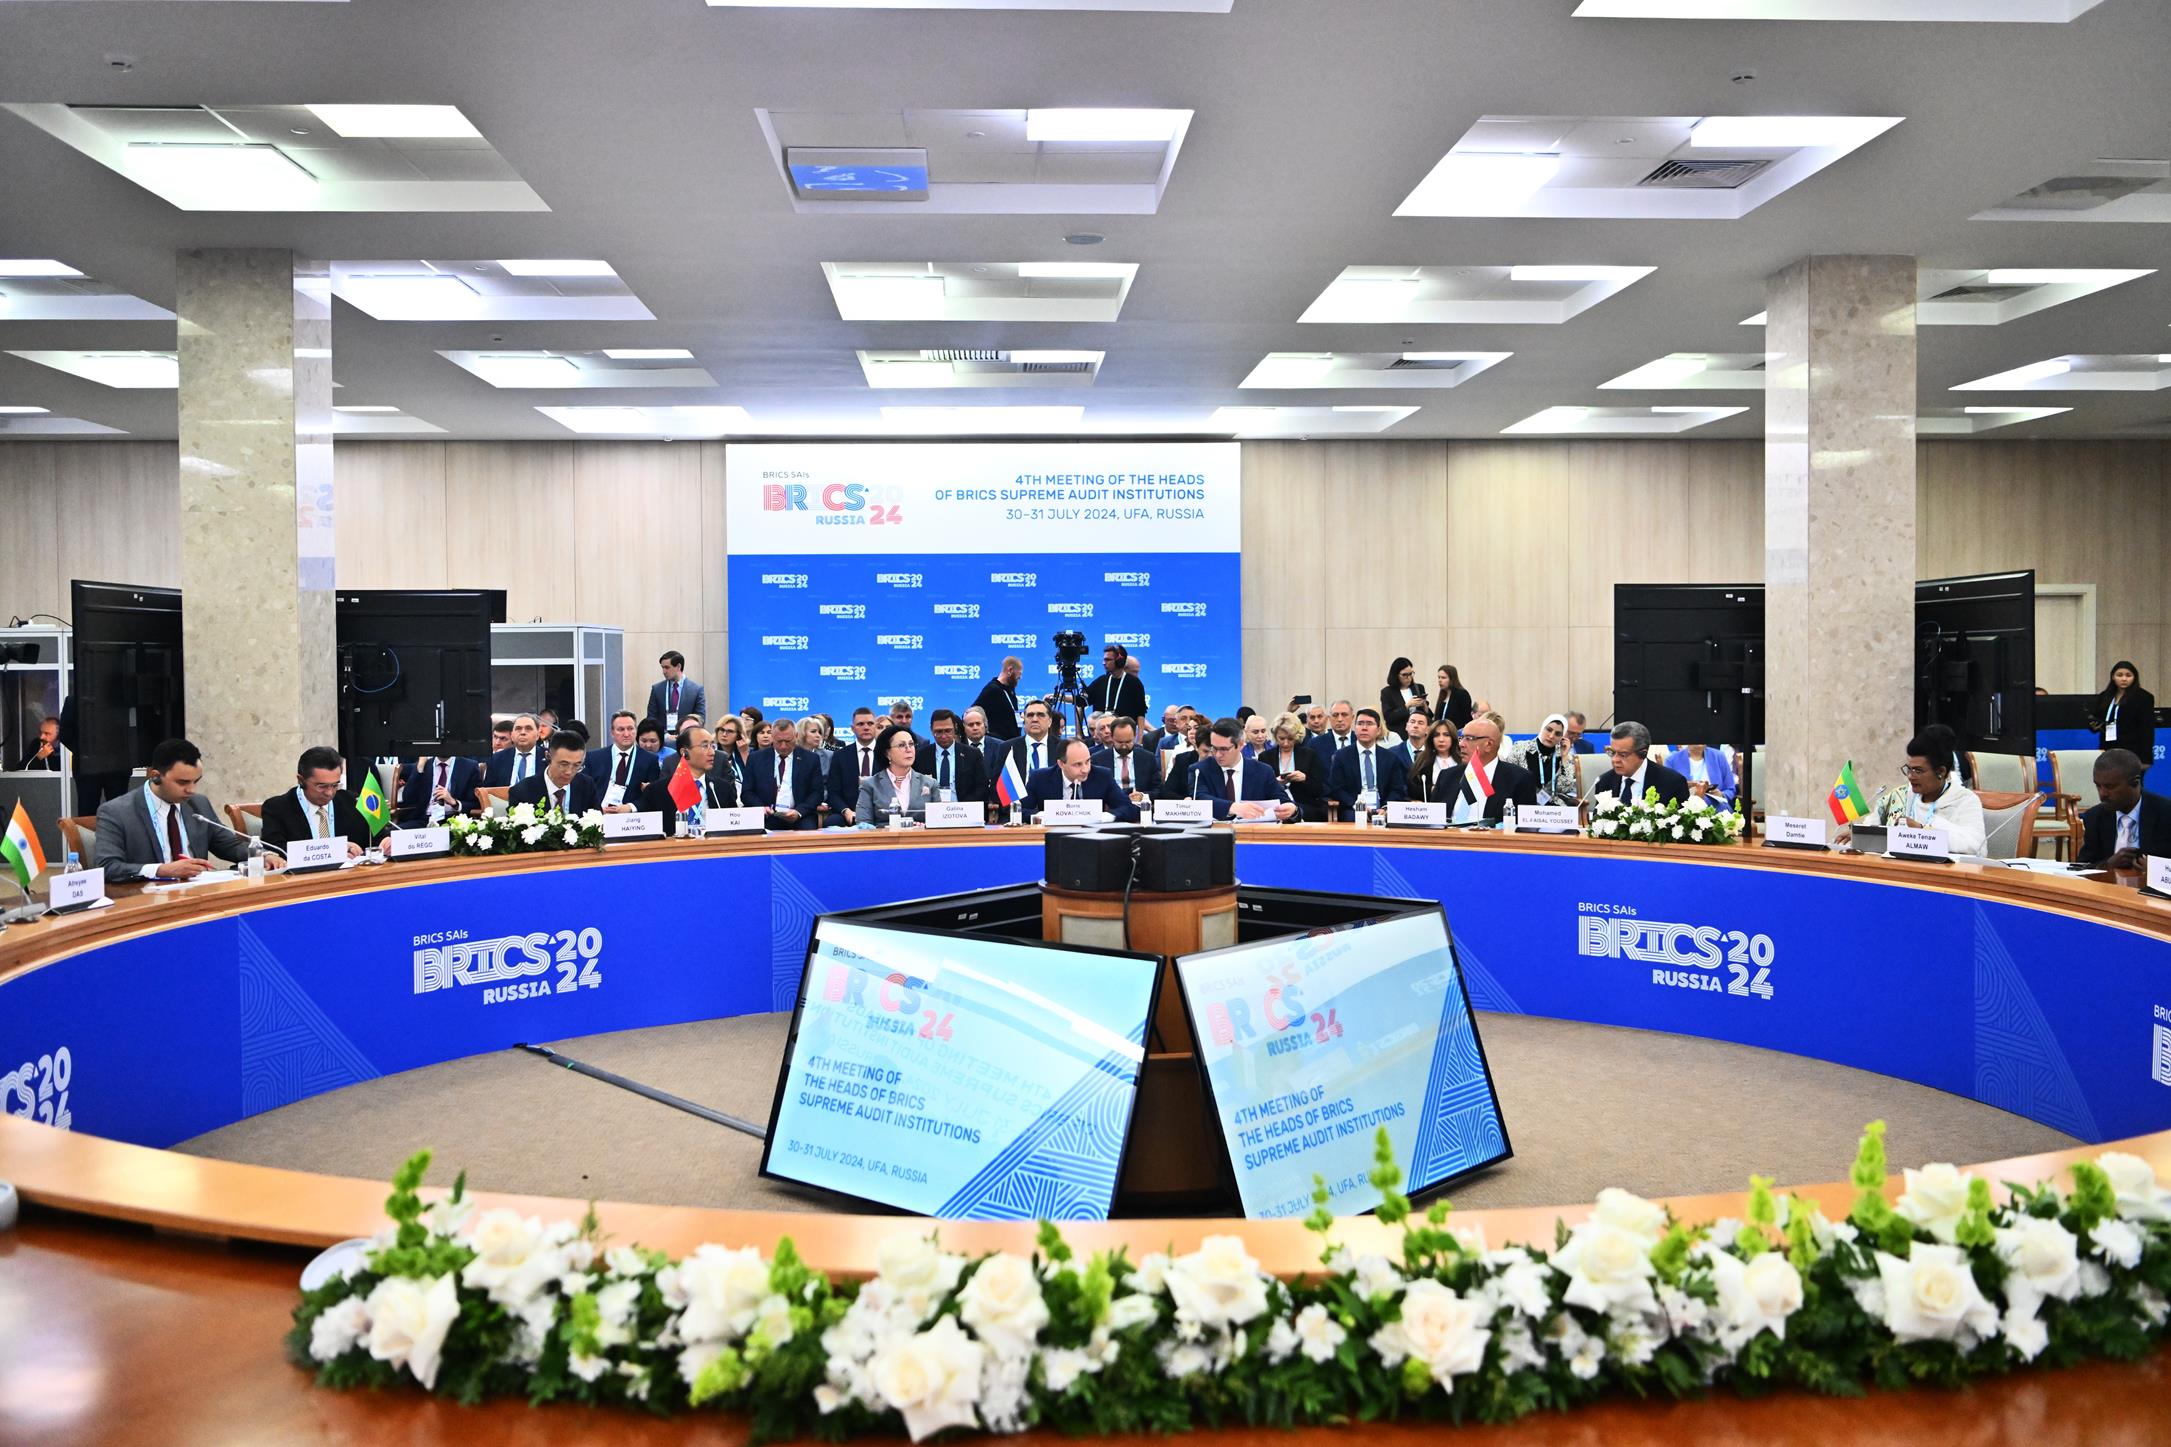 Heads of the supreme audit institutions of the BRICS countries met in Ufa